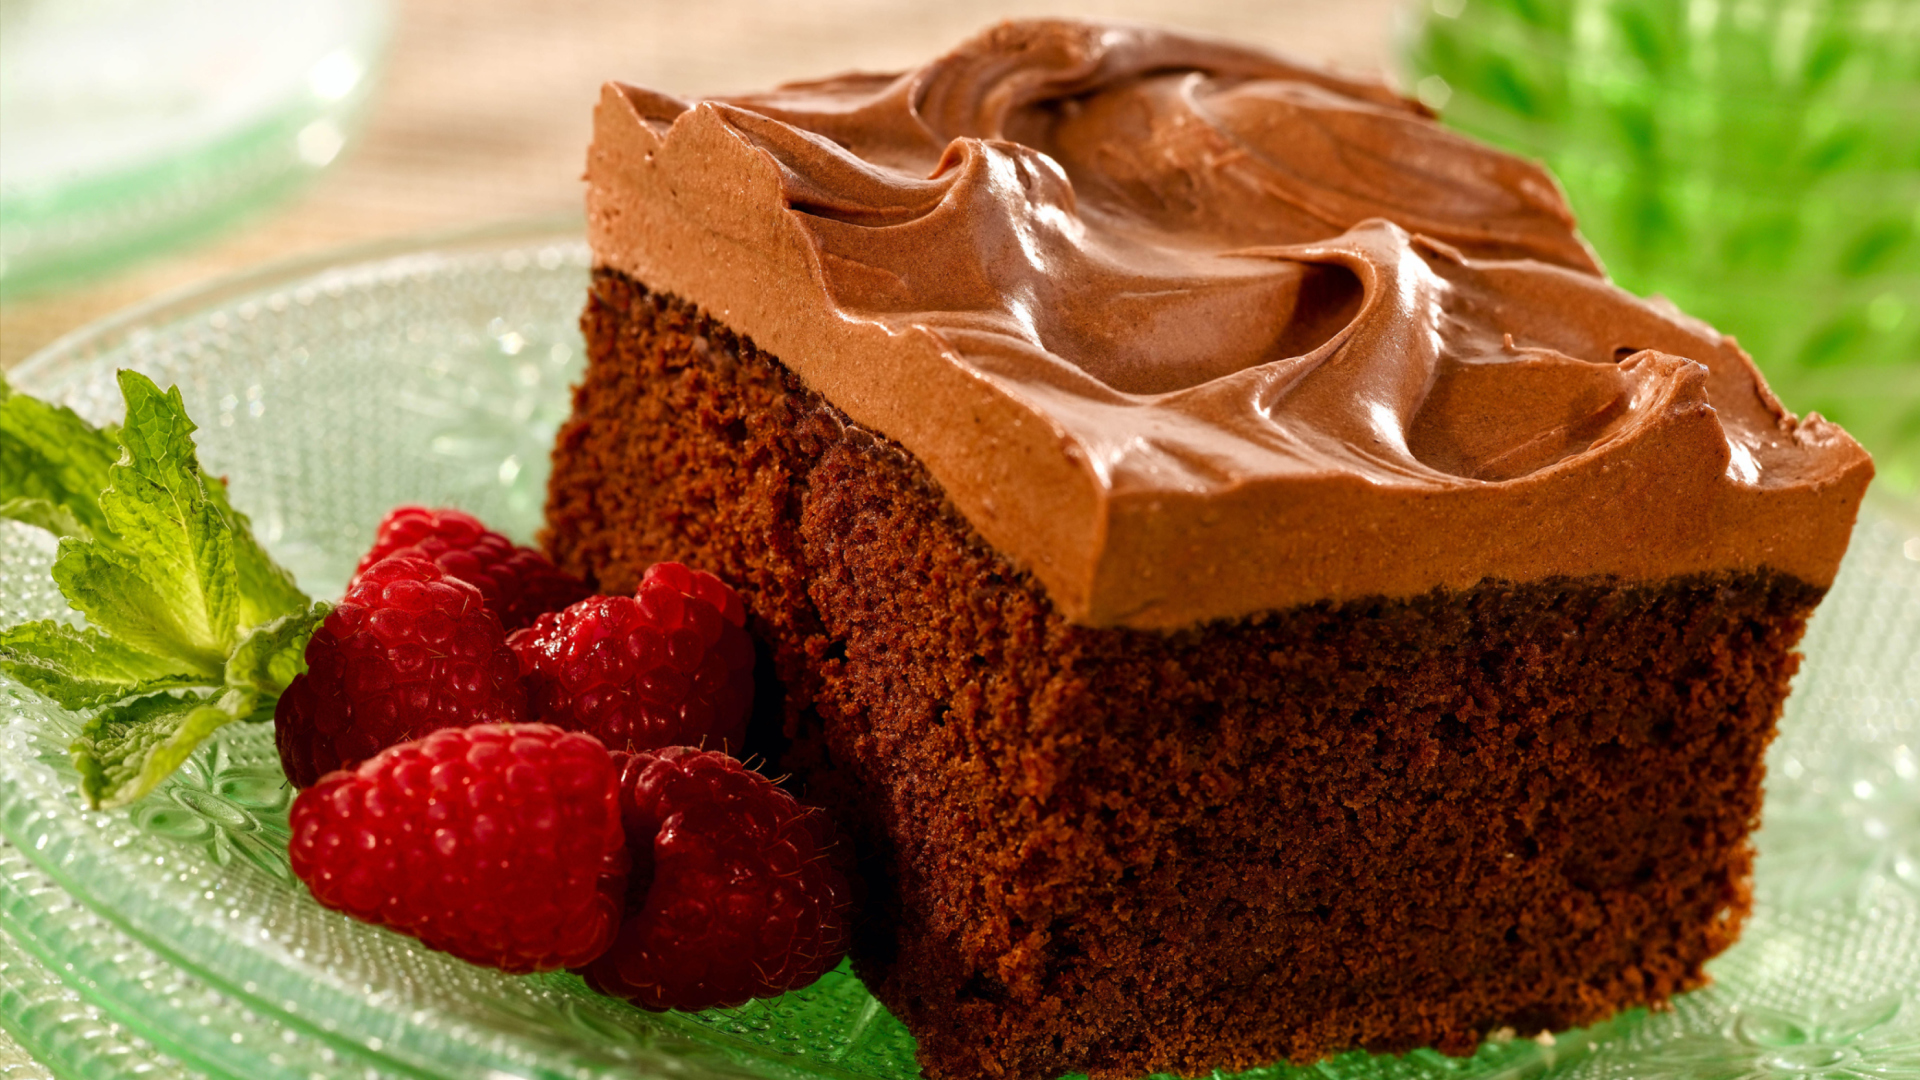 Mouth Watering Cake wallpaper 1920x1080